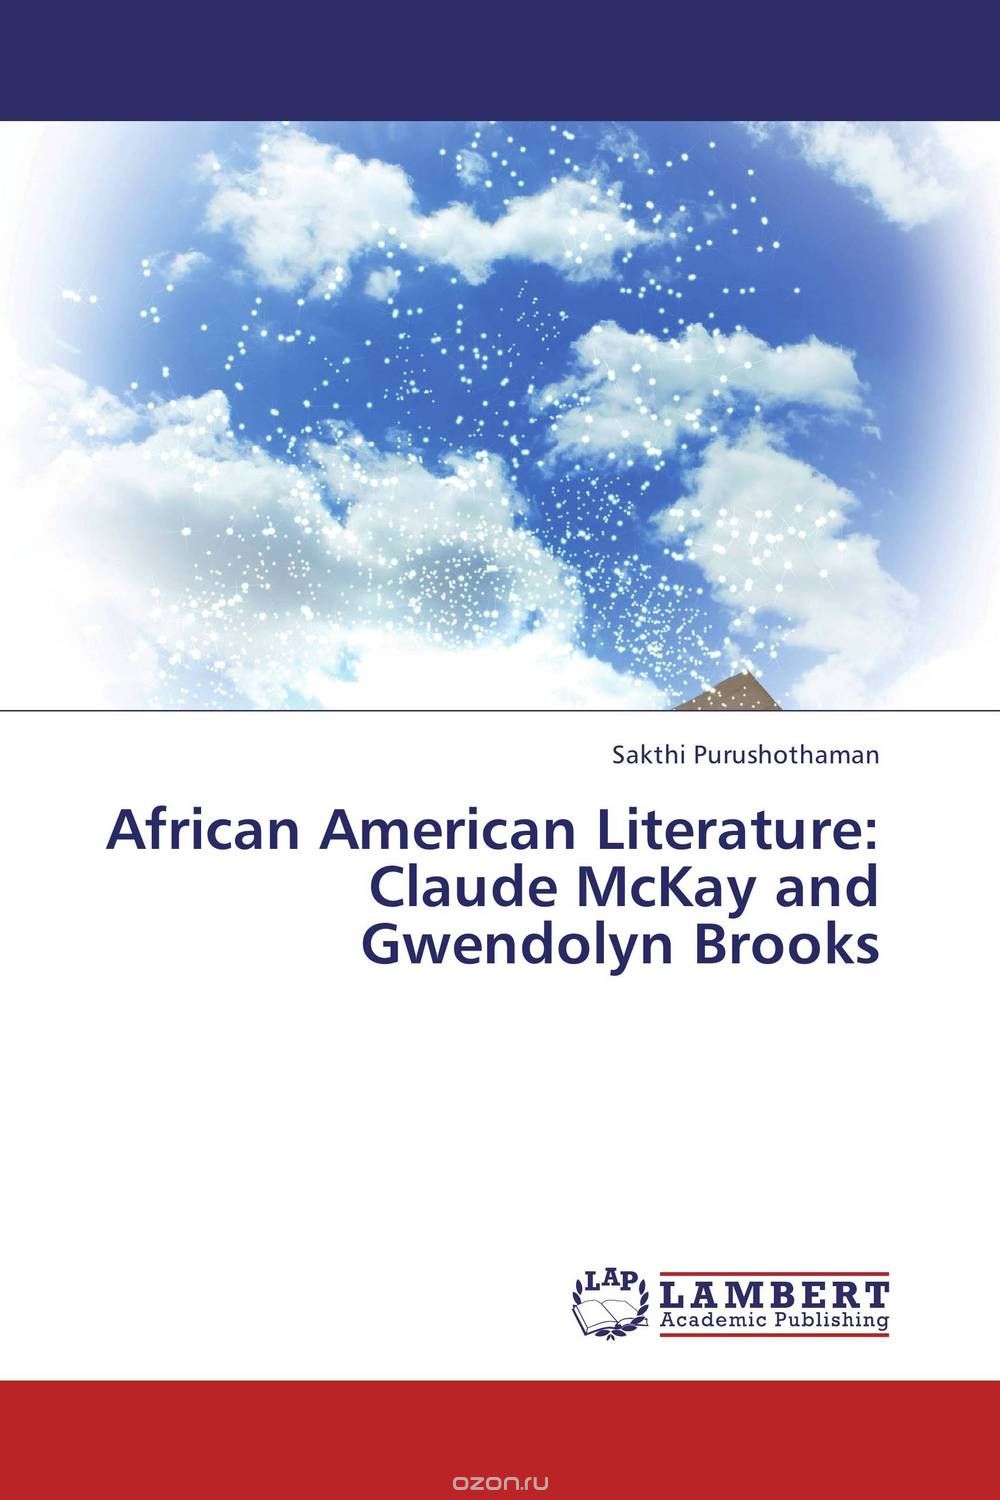 African American Literature: Claude McKay and Gwendolyn Brooks